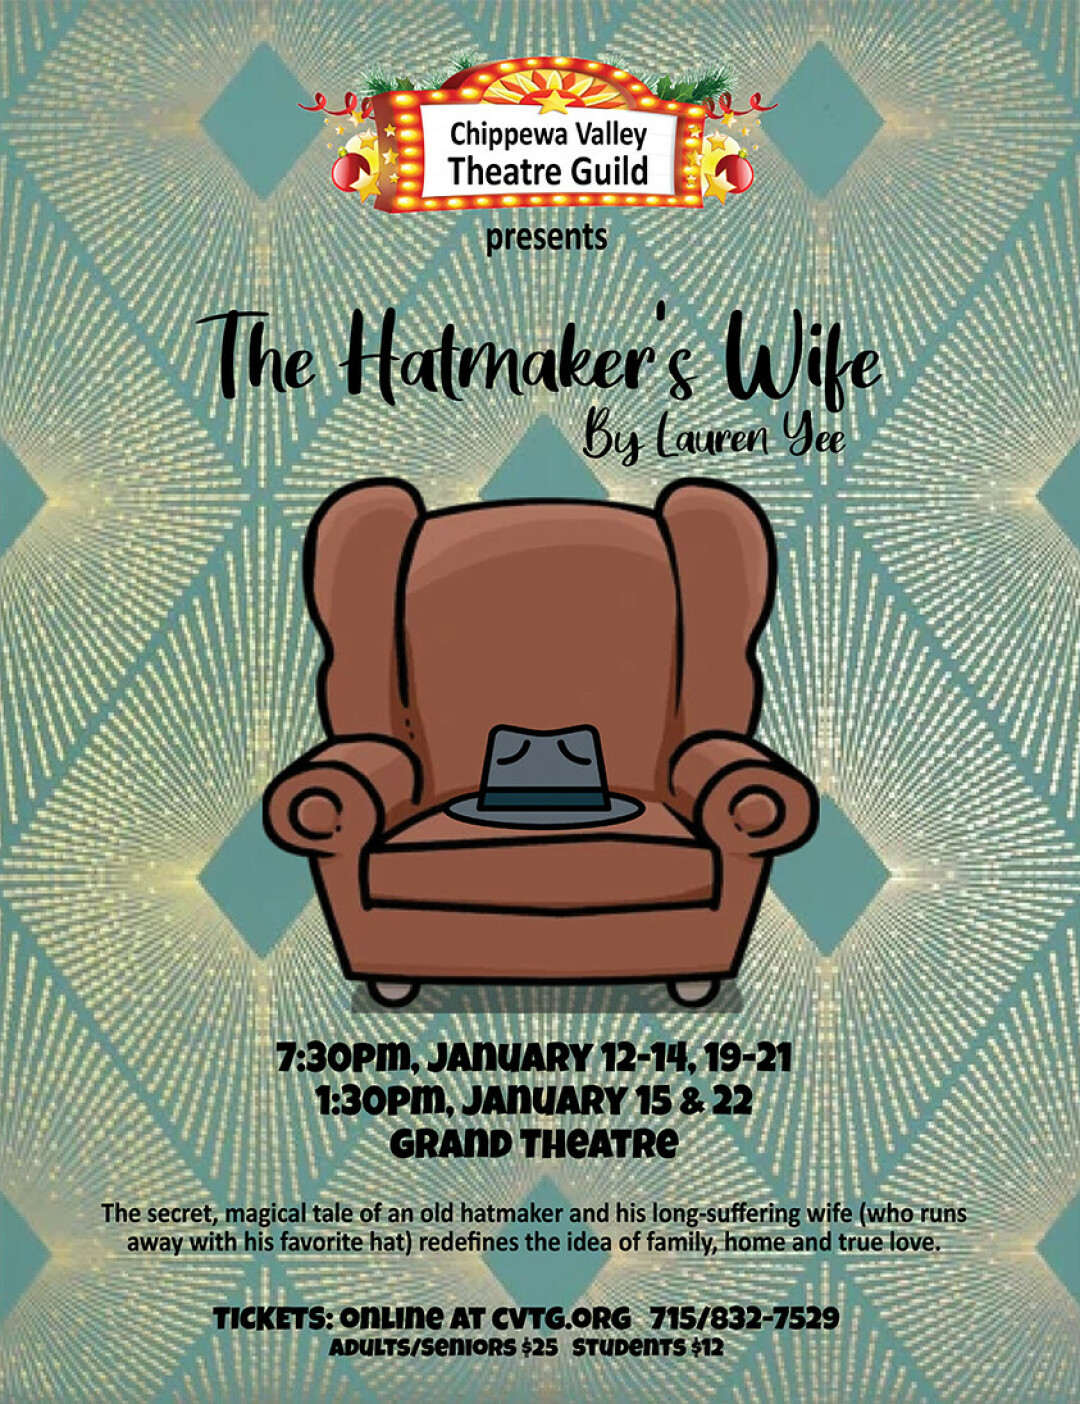 WIFED UP. CVTG is opening up its 41st season with The Hatmaker's Wife with a nine-person cast and directed by Logan Toftness.